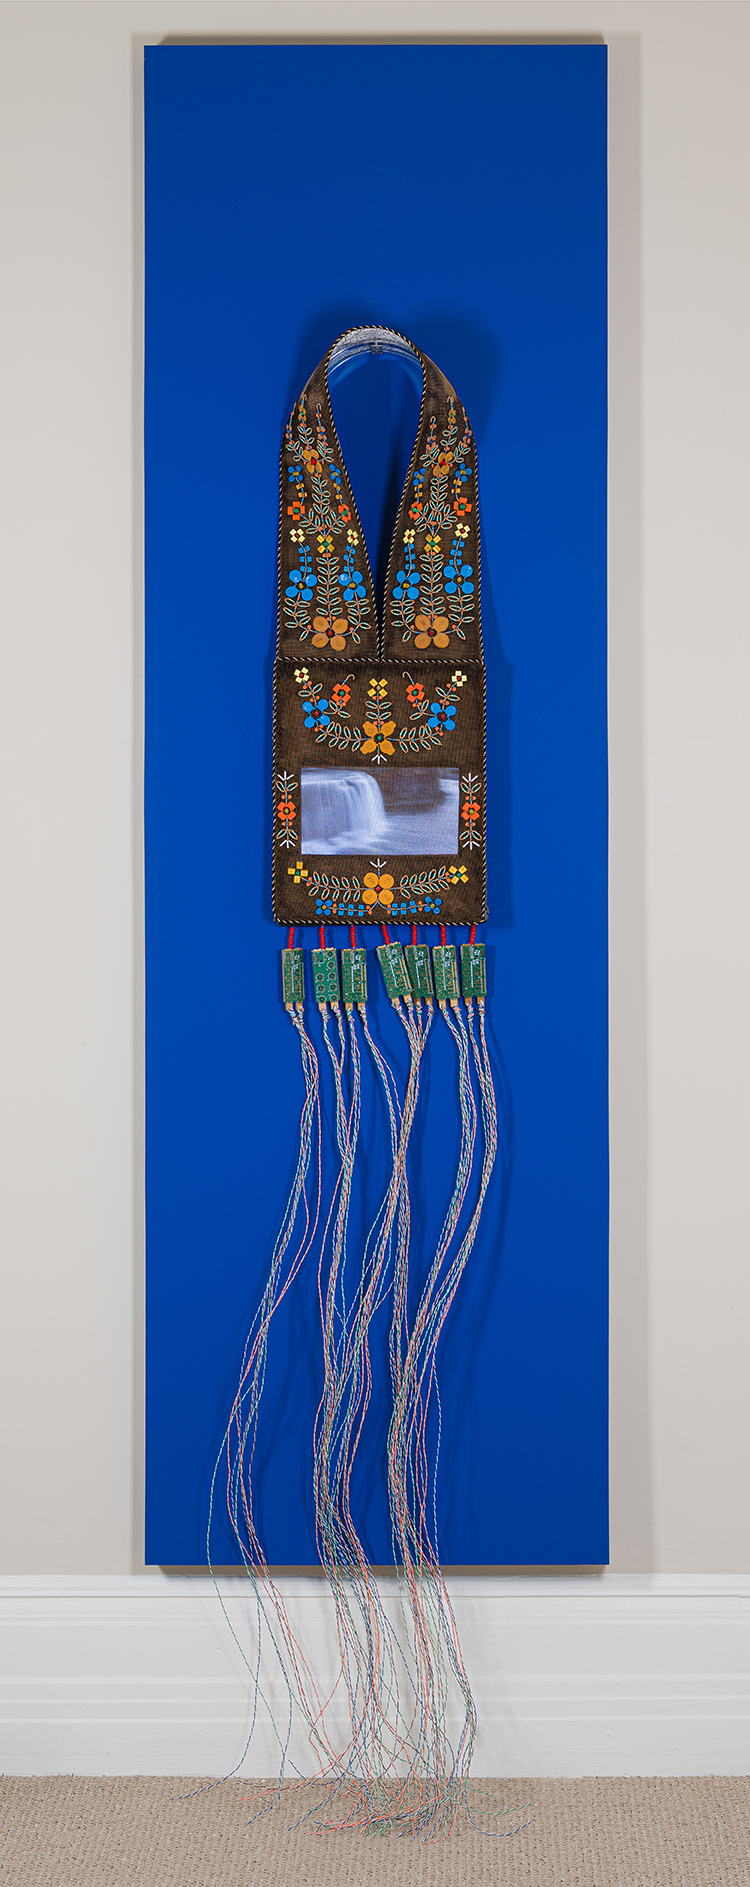 Bandolier for Pasapkedjinawong (The river that passes between the rocks) Rideau River par Barry Ace